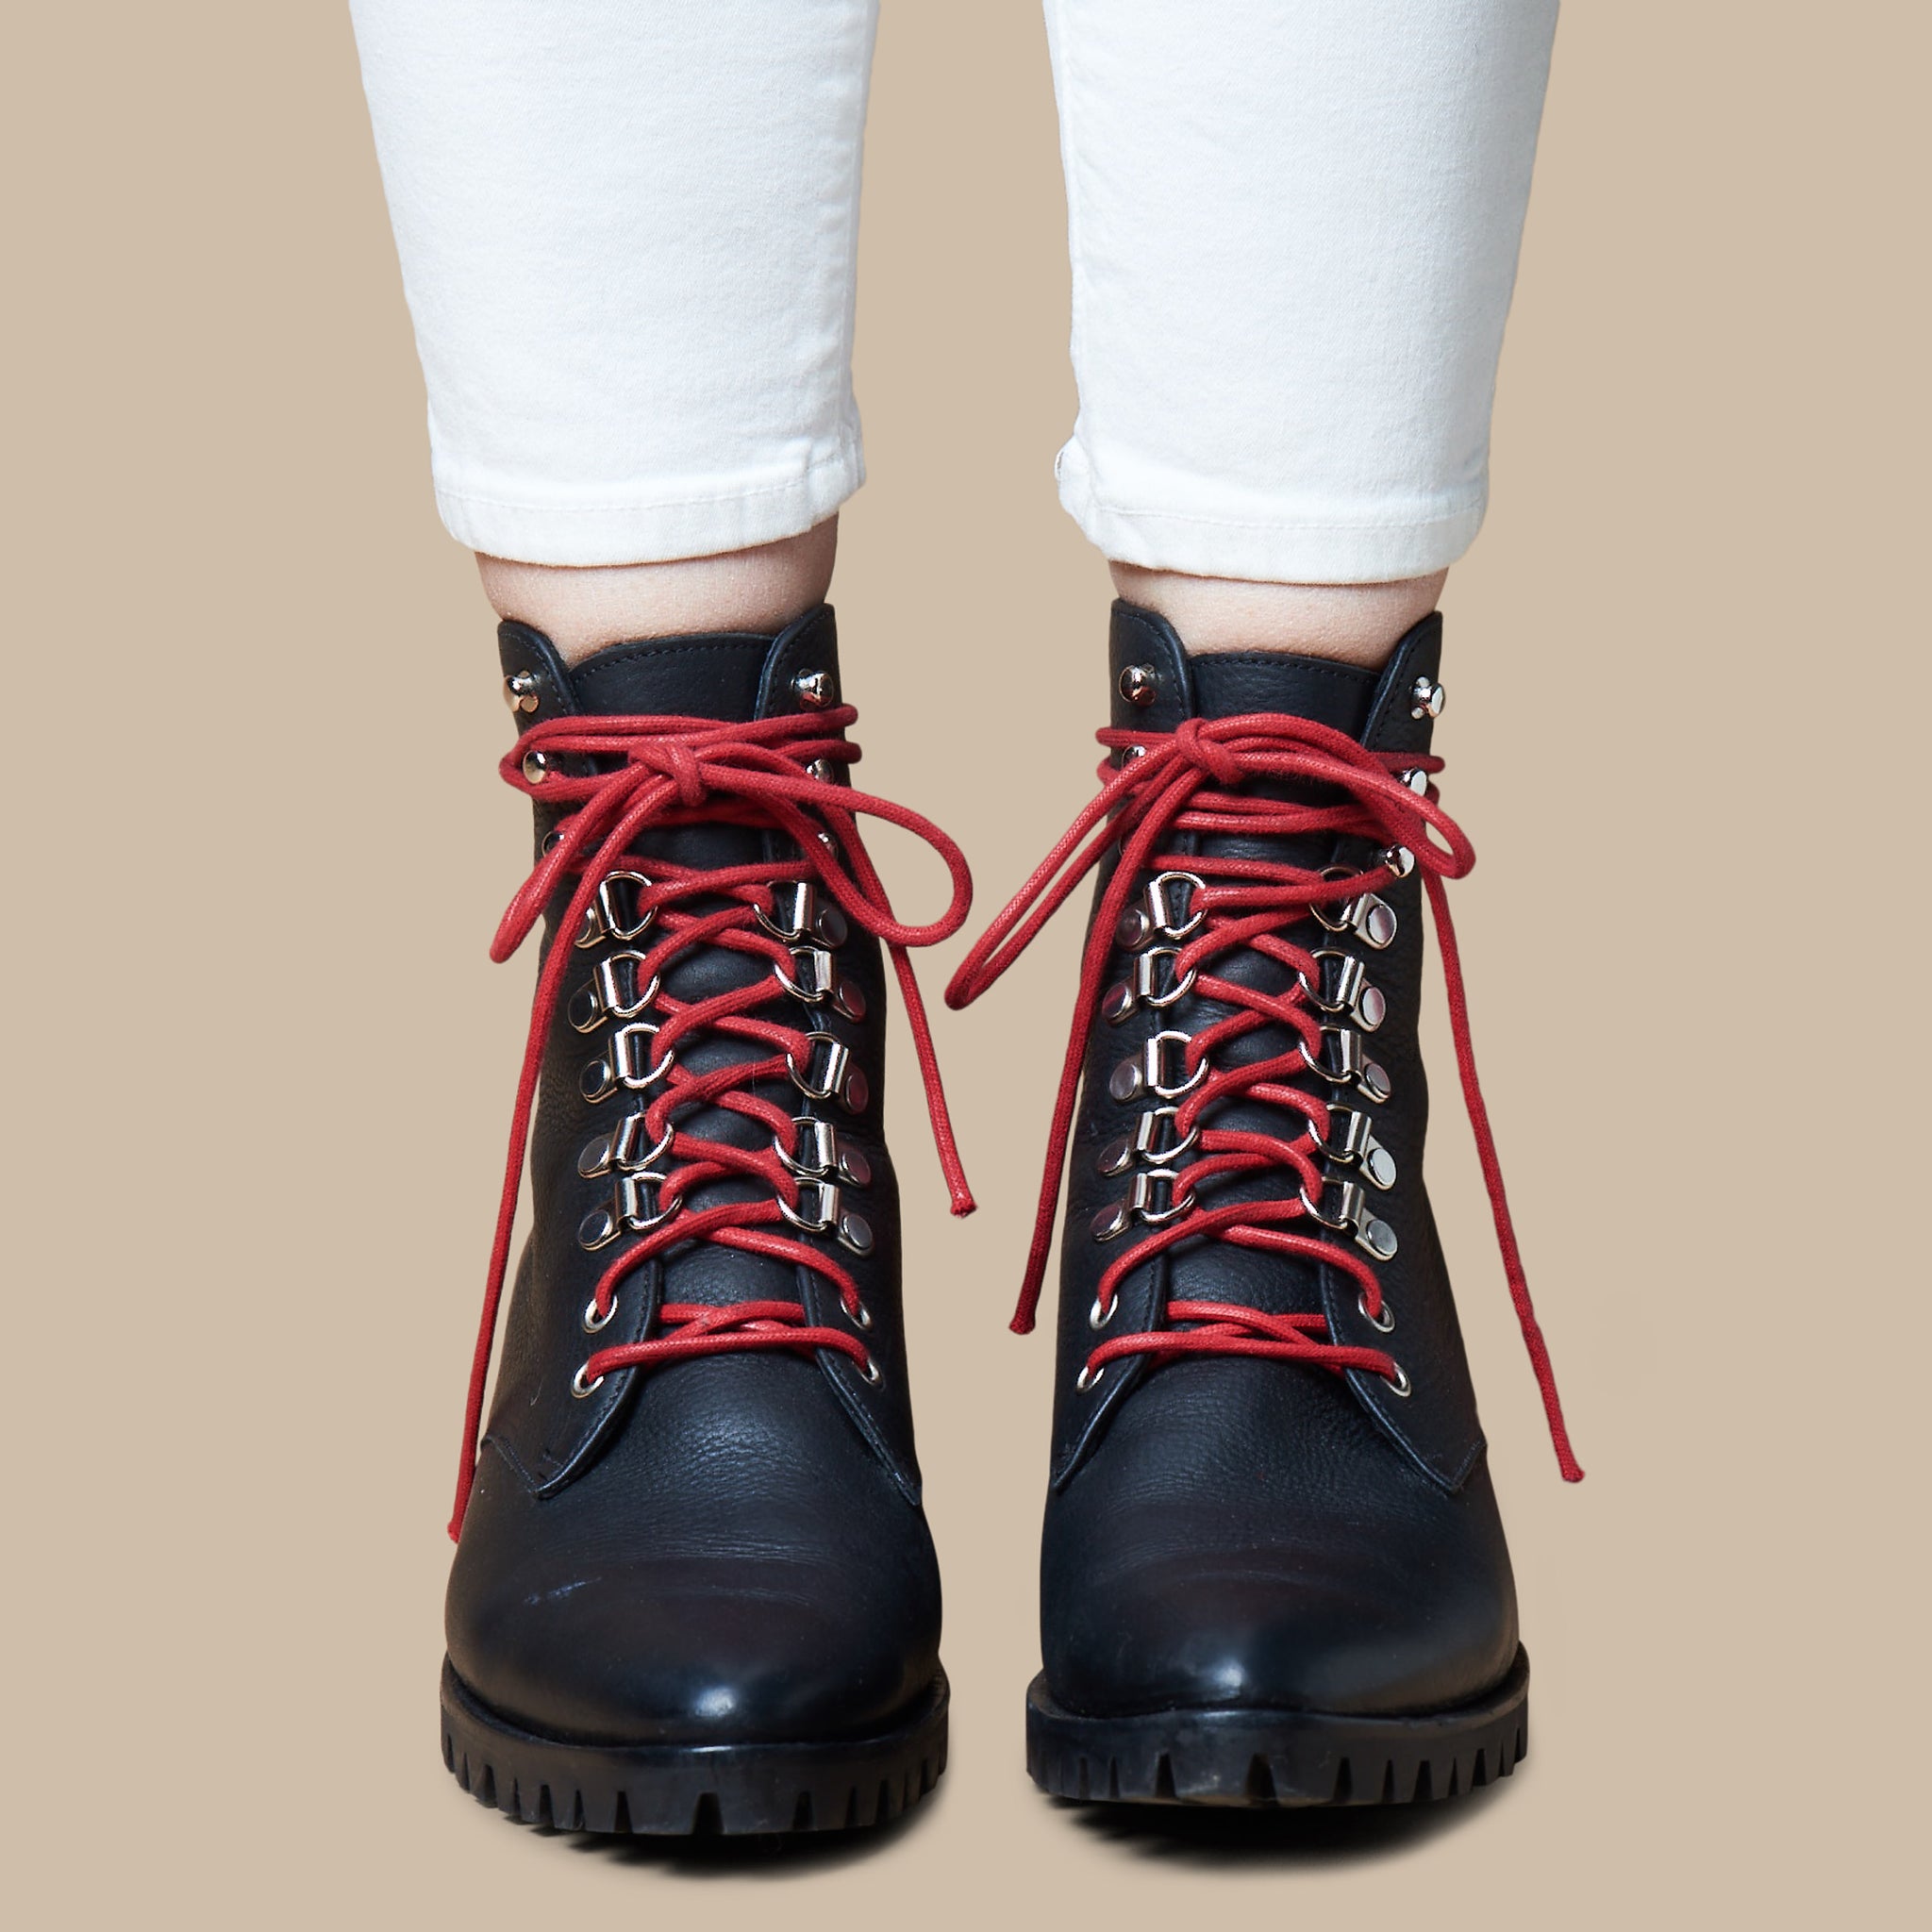 walking boots red laces